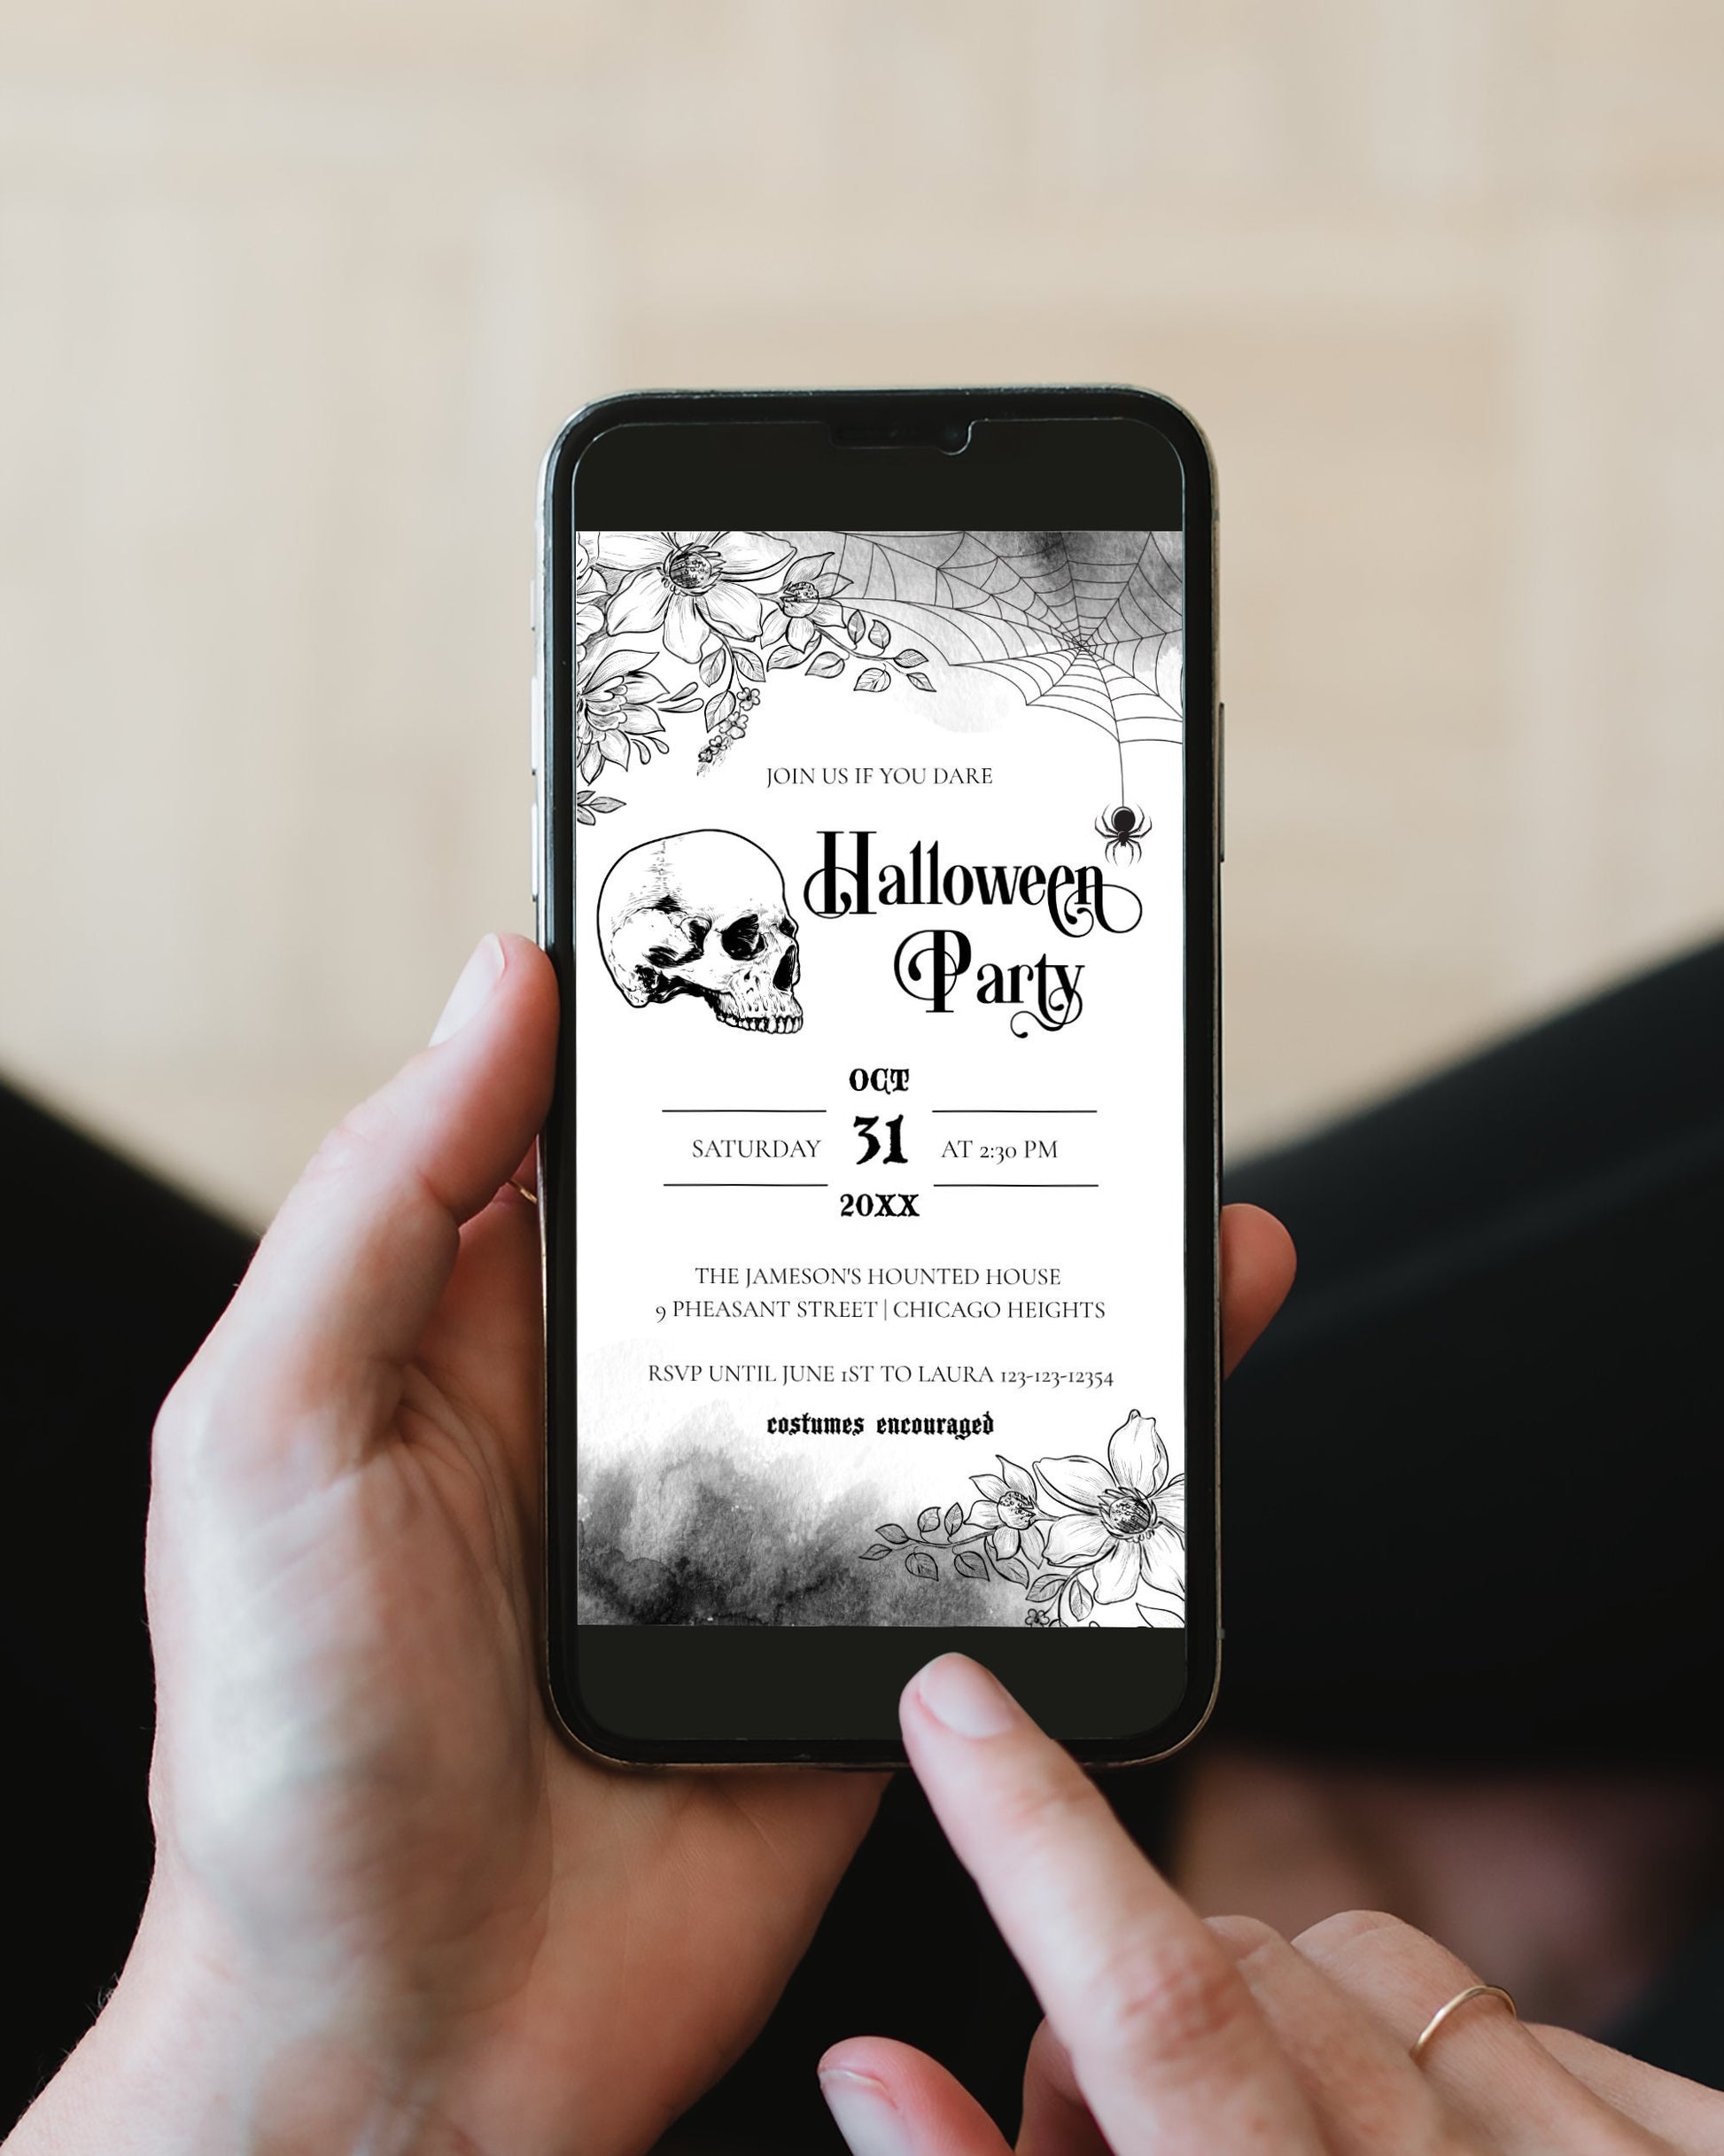 Phone Halloween Party Invitation for Adults Digital Costume Party Invitation Template